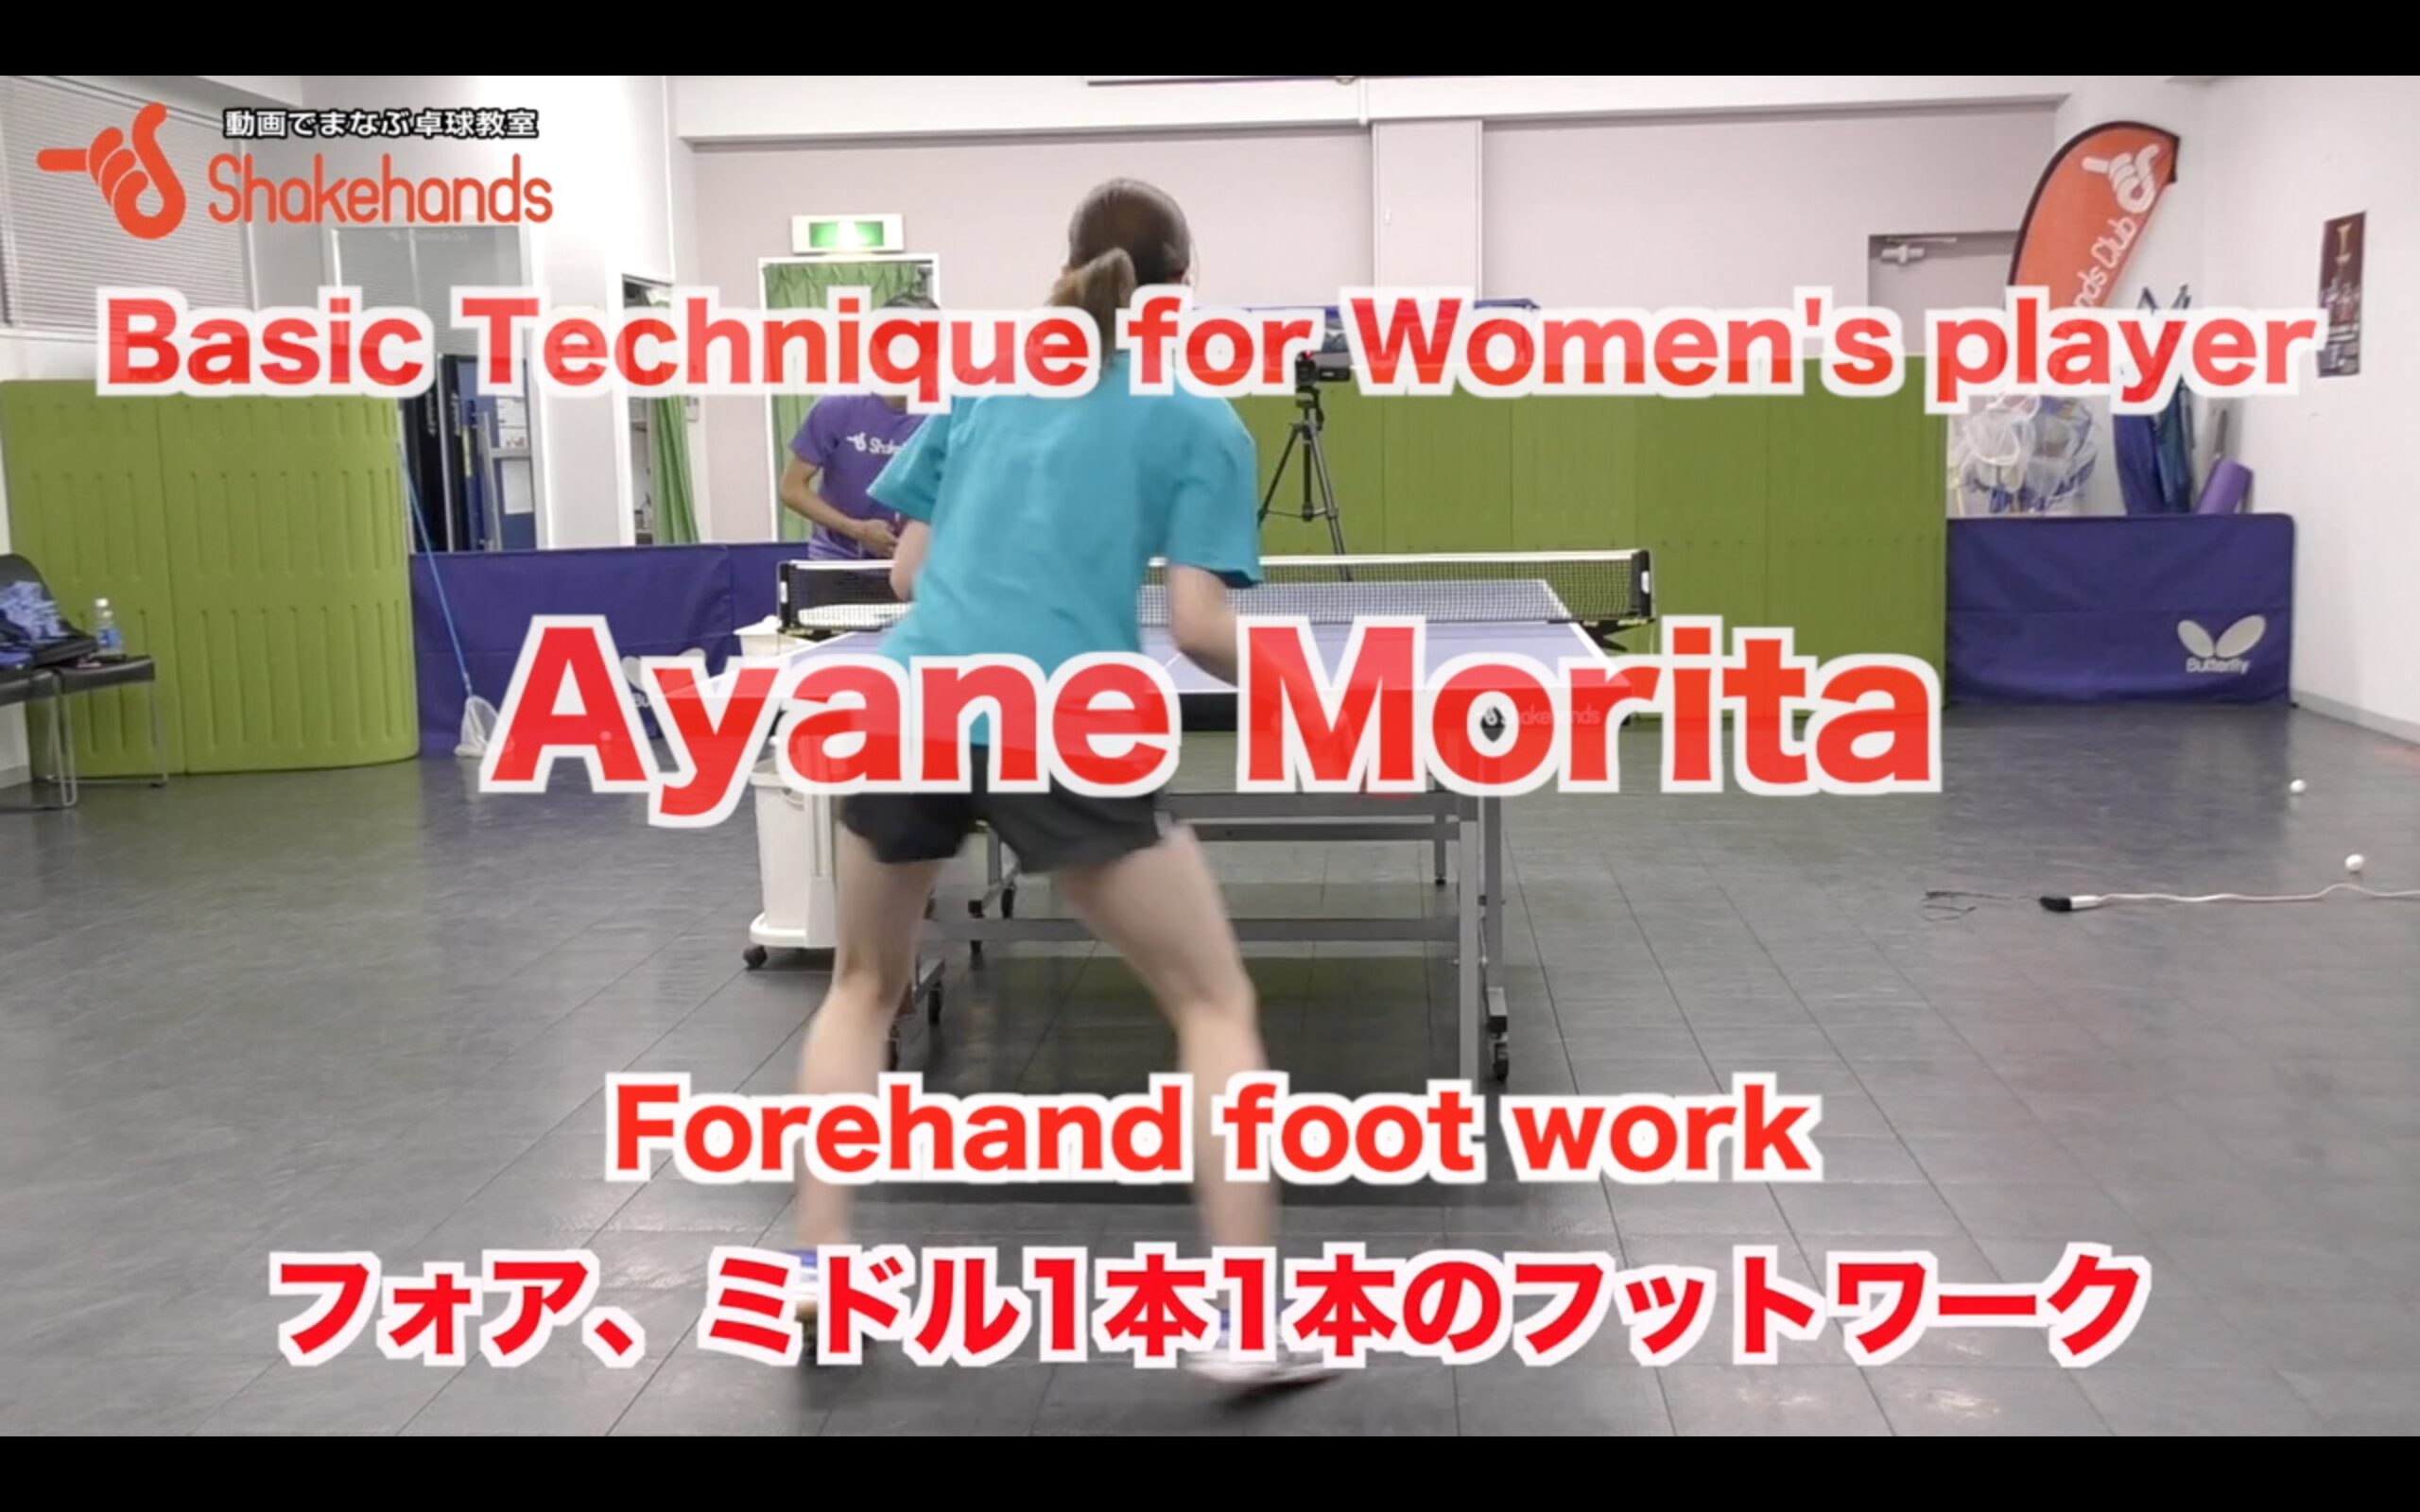 Forehand foot work